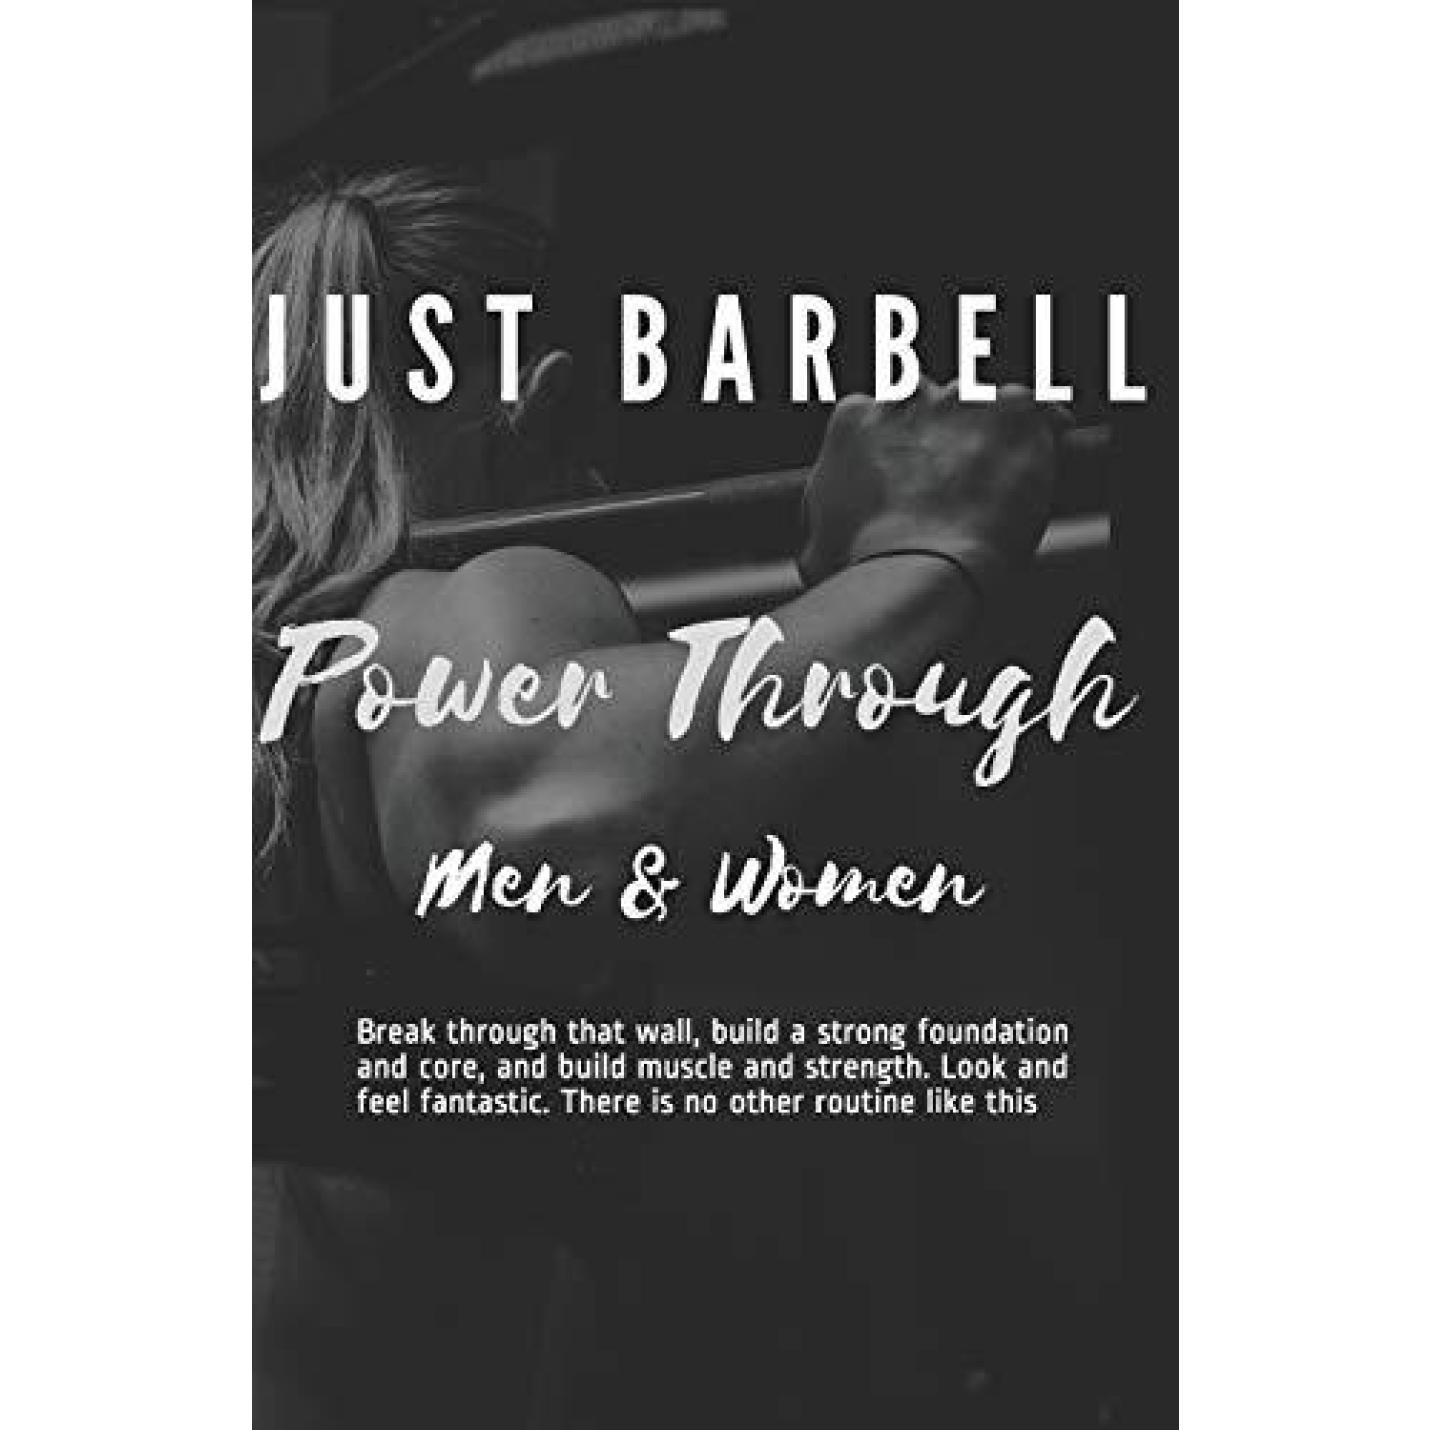 Just Barbell - Power Through: Men & Woman - Break through that wall, build a strong foundation and core, and build muscle and strength. Look and feel fantastic. There is no other routine like this. Paperback